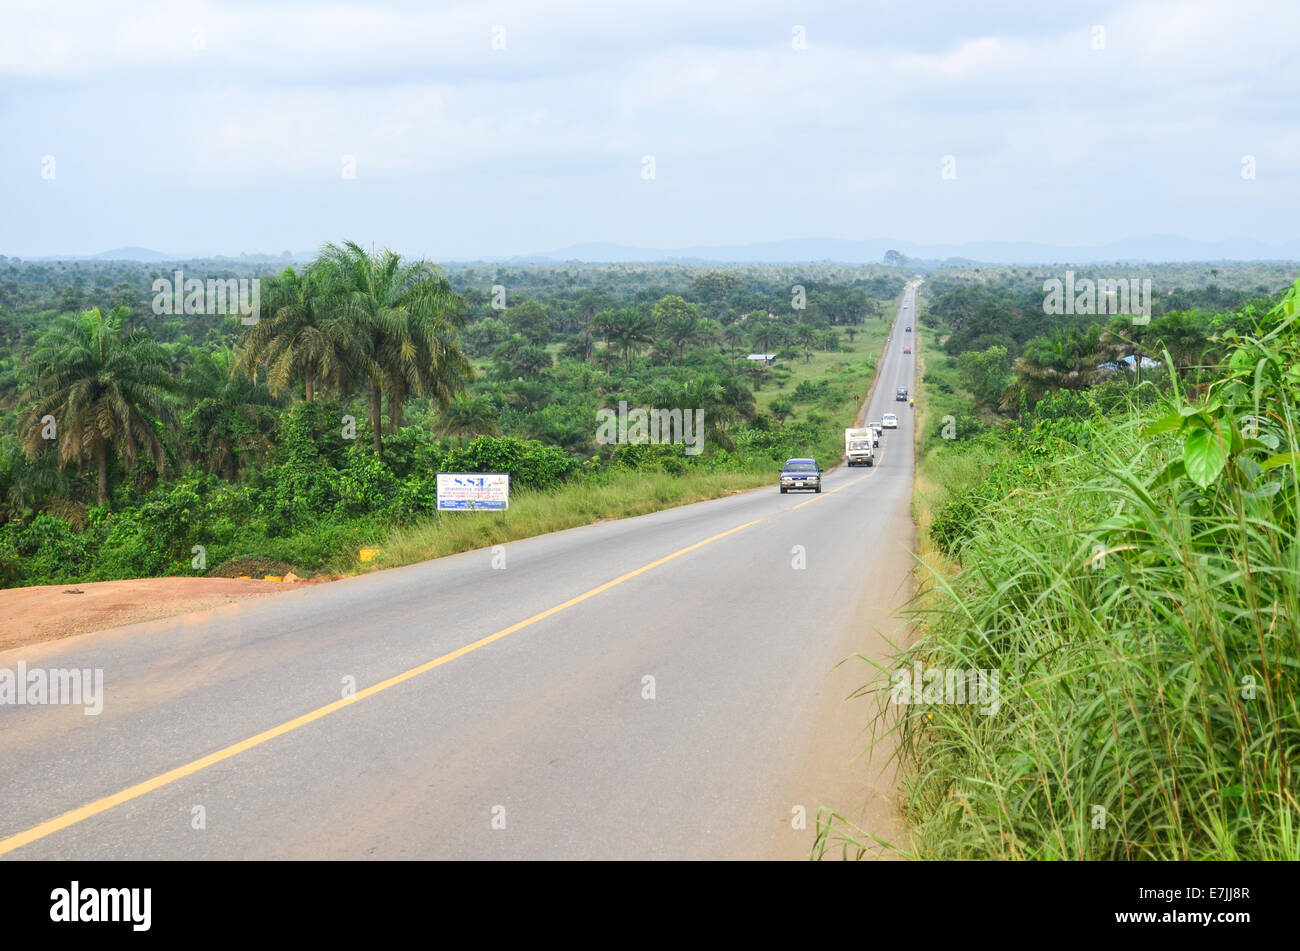 Road from Monrovia to the Roberts airport, Liberia, Africa Stock Photo